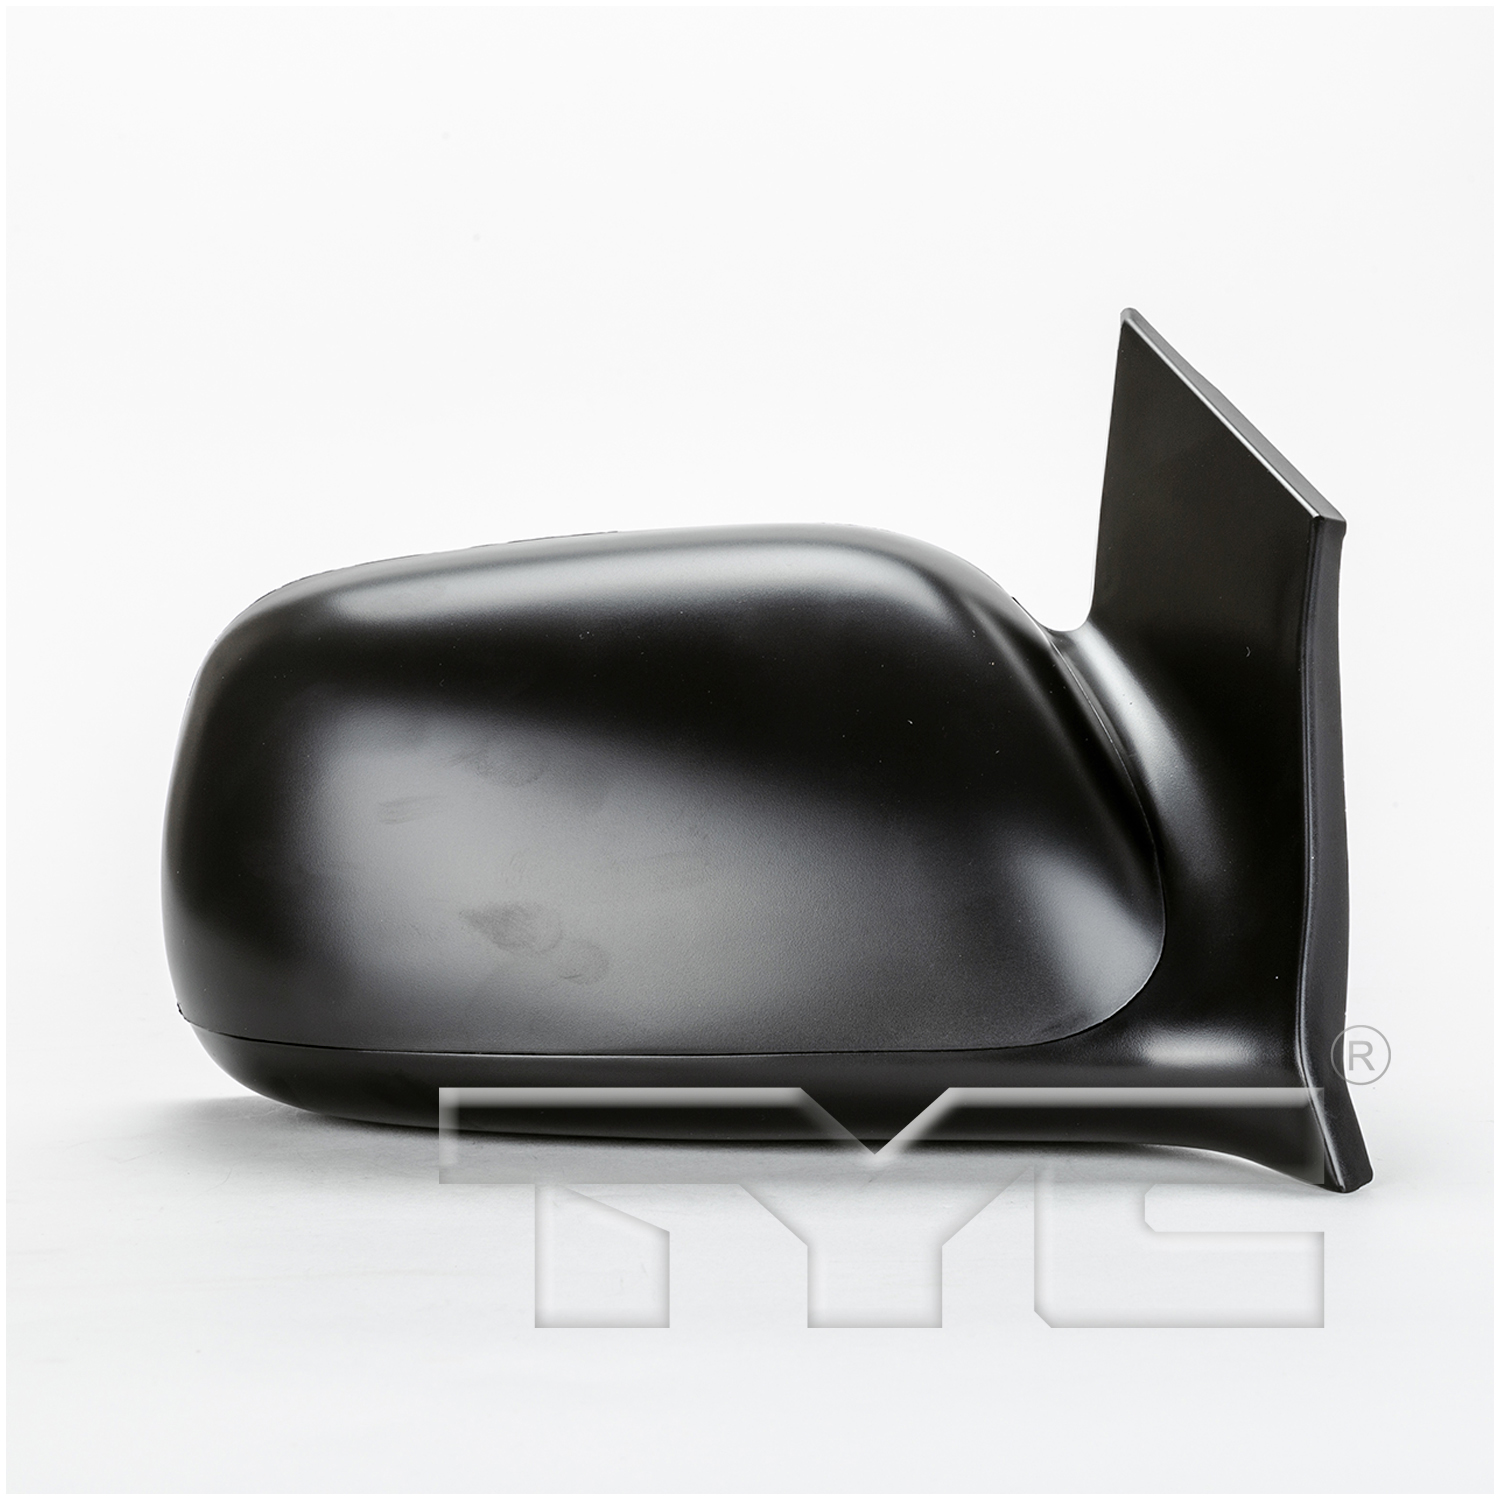 Aftermarket MIRRORS for HONDA - CIVIC, CIVIC,06-11,RT Mirror outside rear view